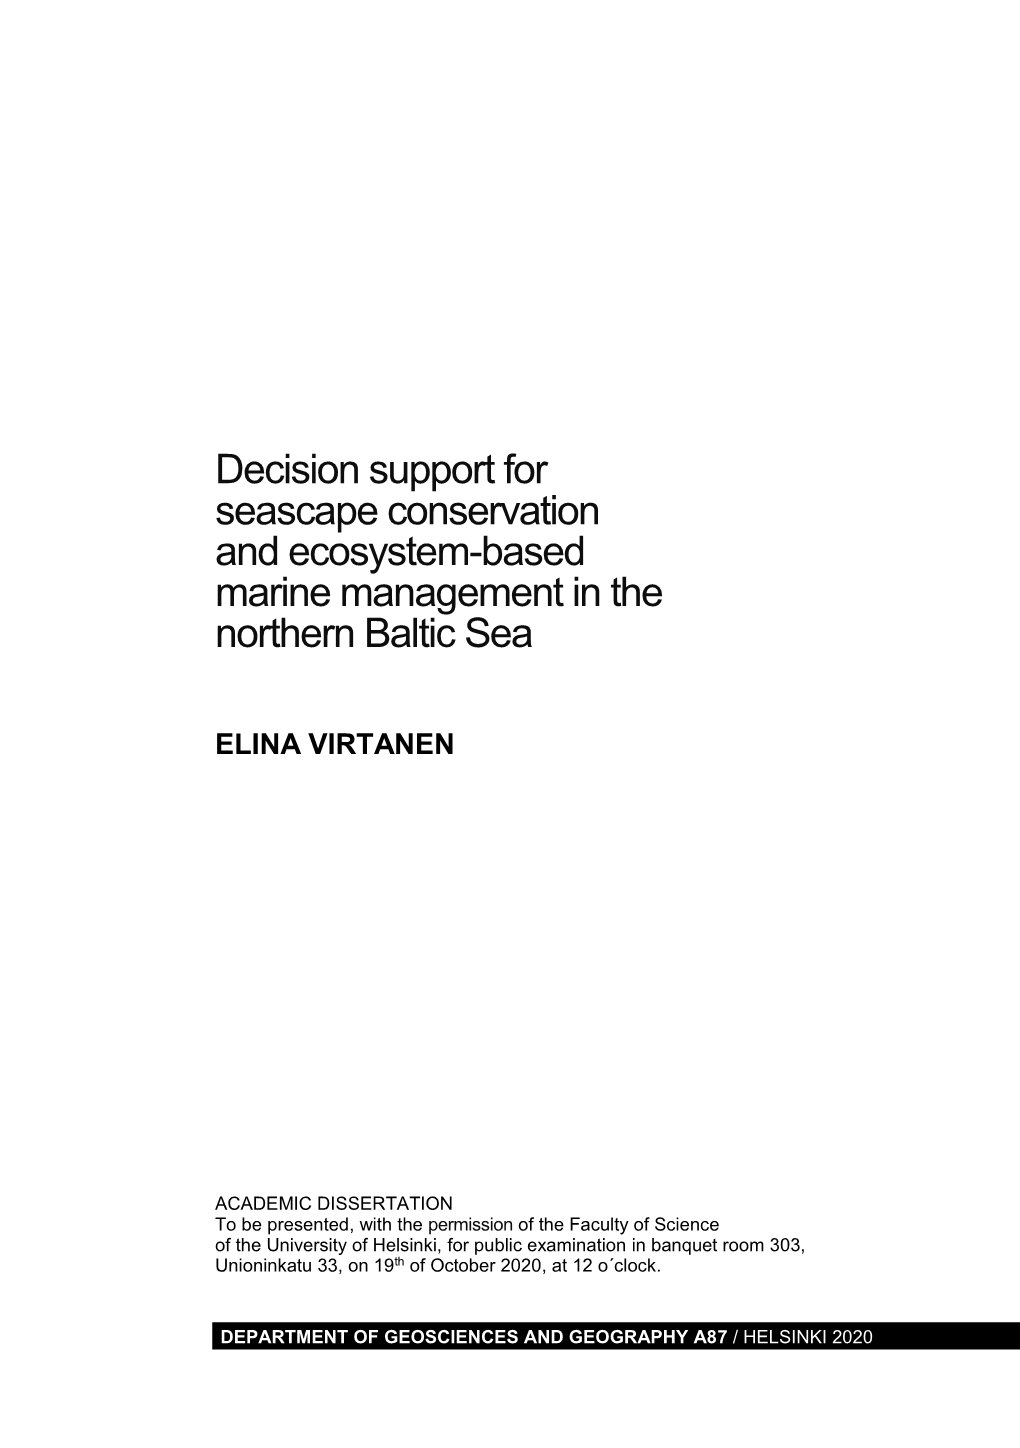 Decision Support for Seascape Conservation and Ecosystem-Based Marine Management in the Northern Baltic Sea